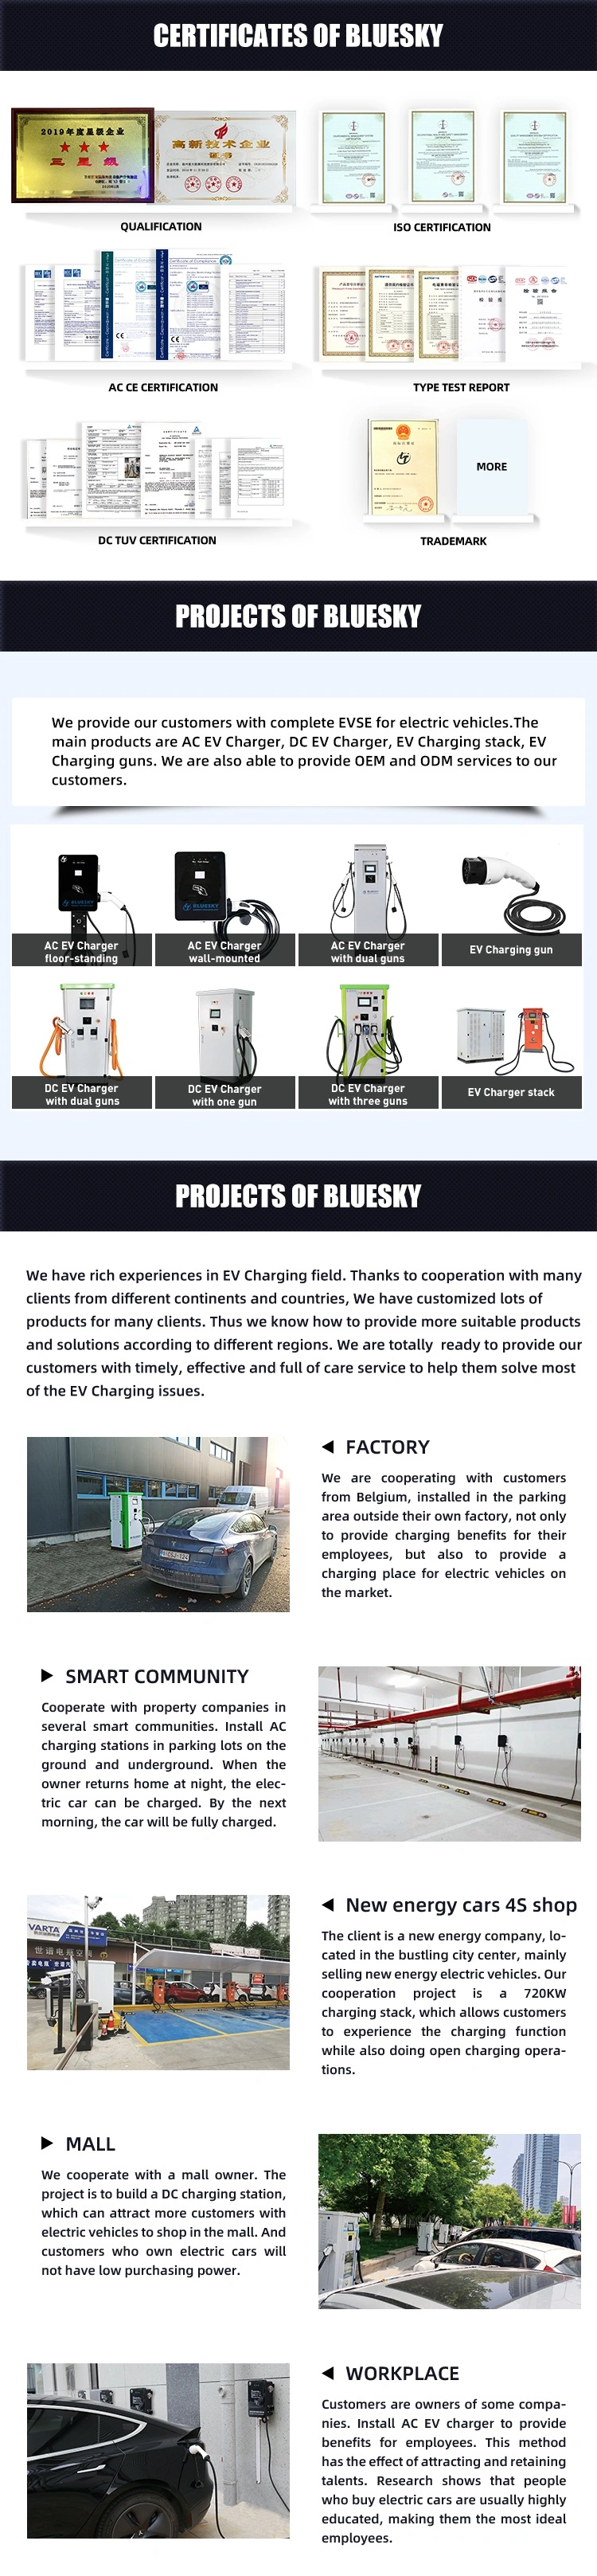 30kw DC EV Fast Charger CCS/Chademo/GB Single Connector with Ocpp for Electric Vehicle